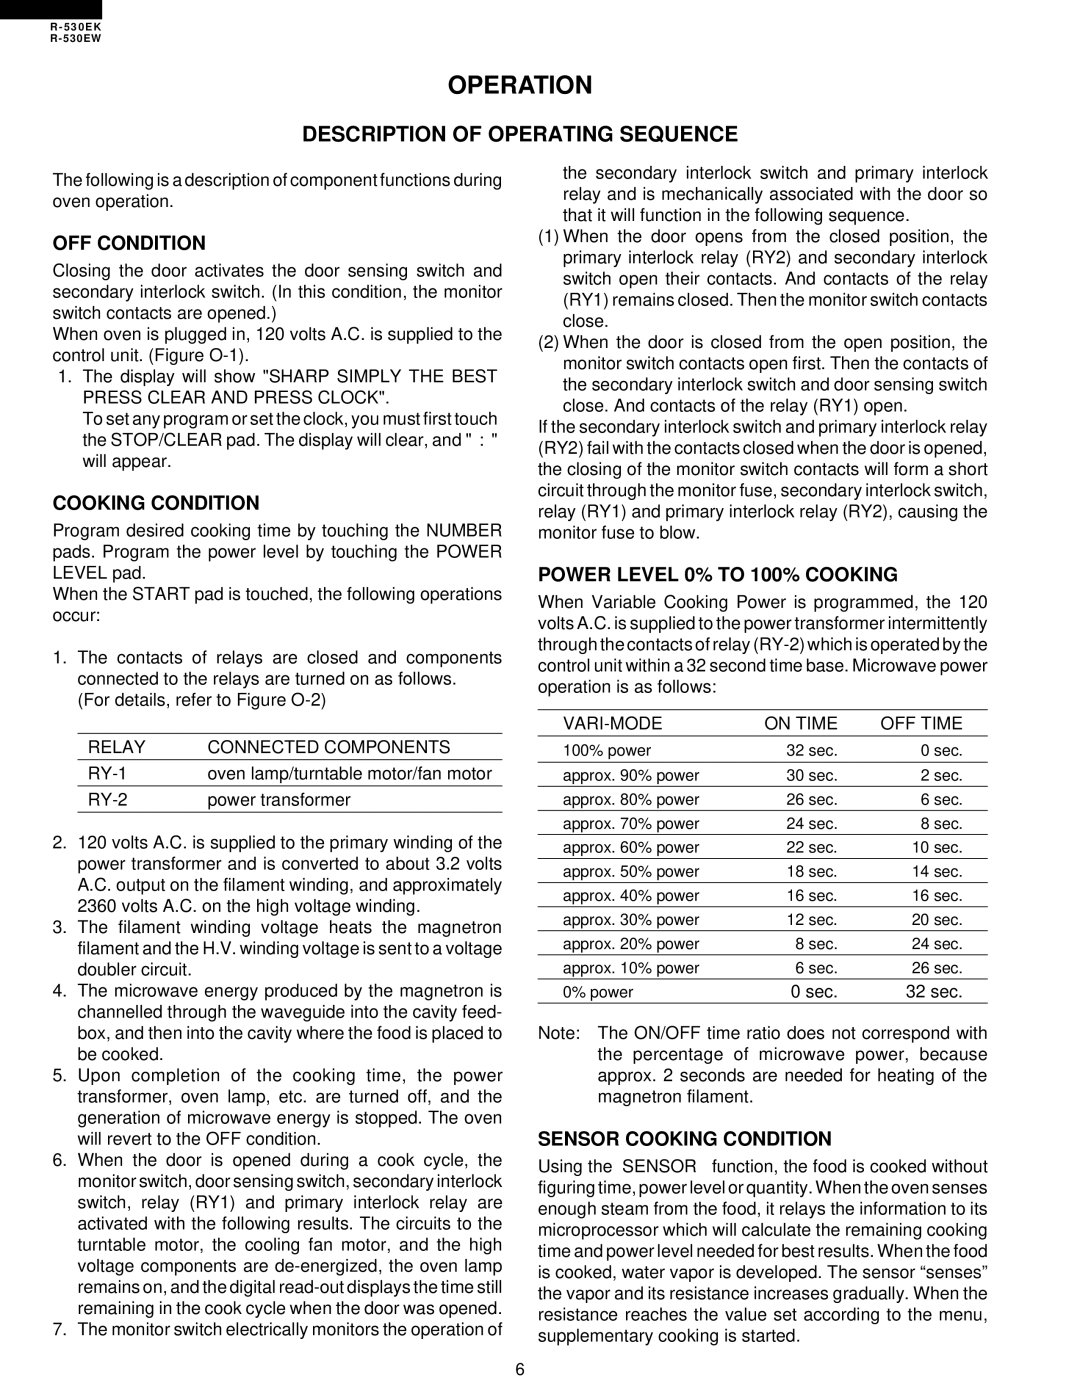 Sharp R-530EK service manual Operation, Description Of Operating Sequence, Off Condition, Sensor Cooking Condition 